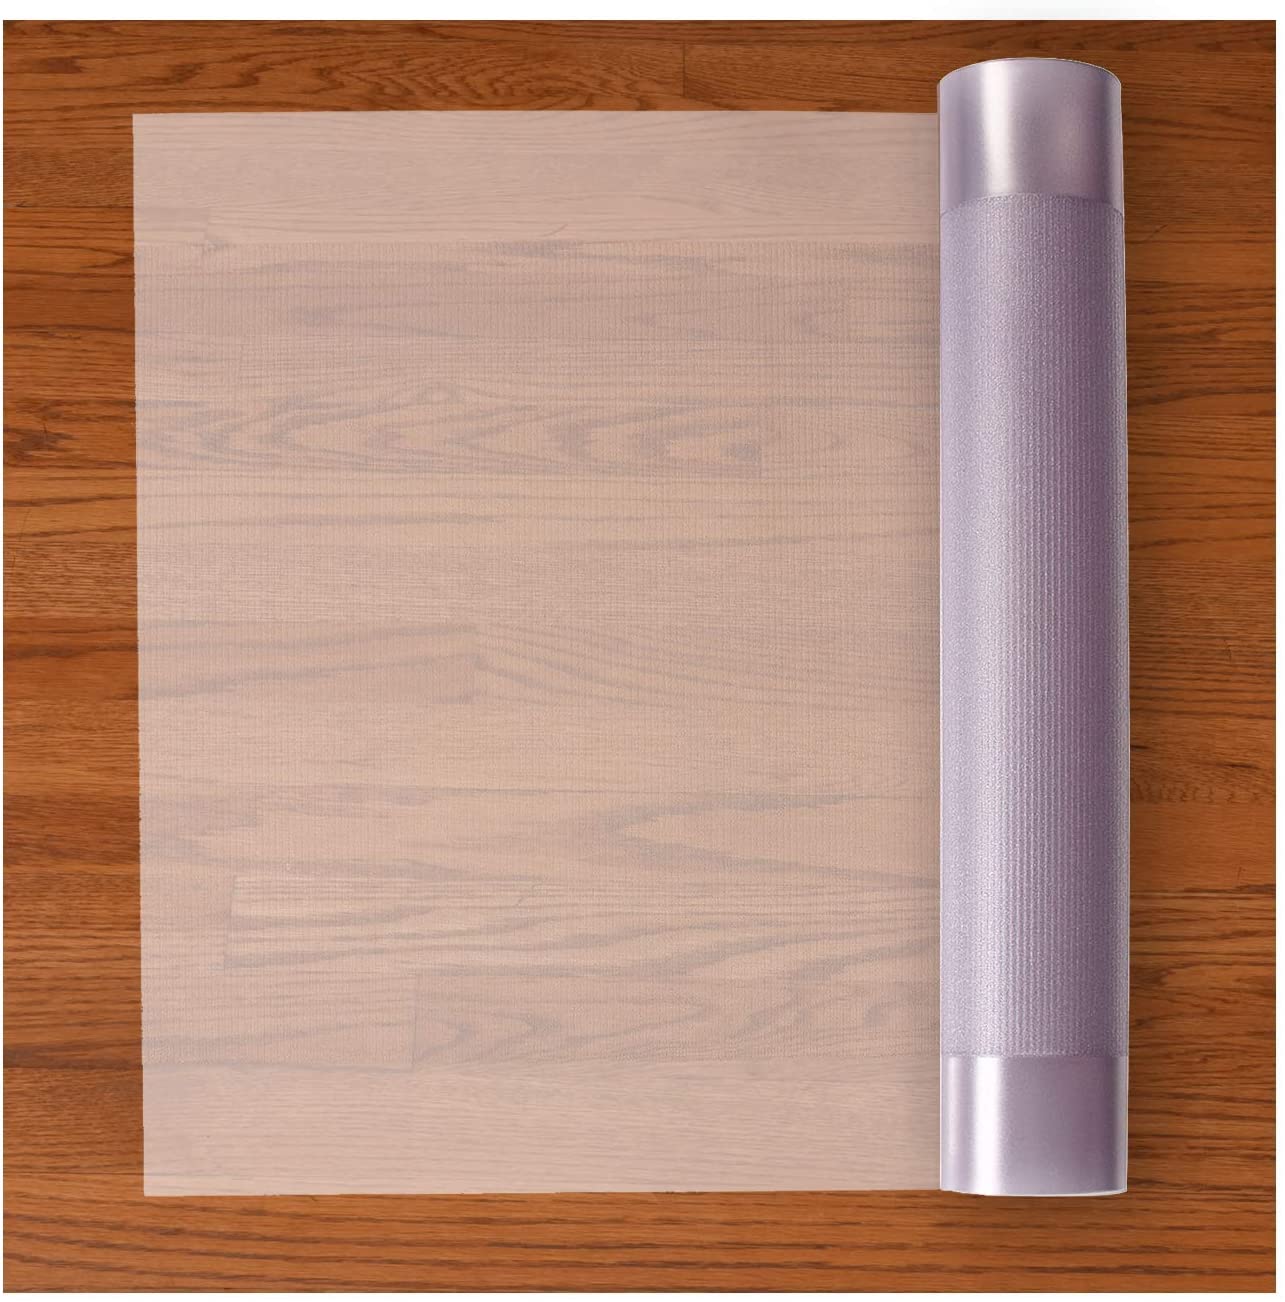 Resilia Premium Floor Protector for Hardwood Floors Easy-to-Clean Heavy Duty Plastic Vinyl Clear American Modern 27 Inches x 25 Feet for